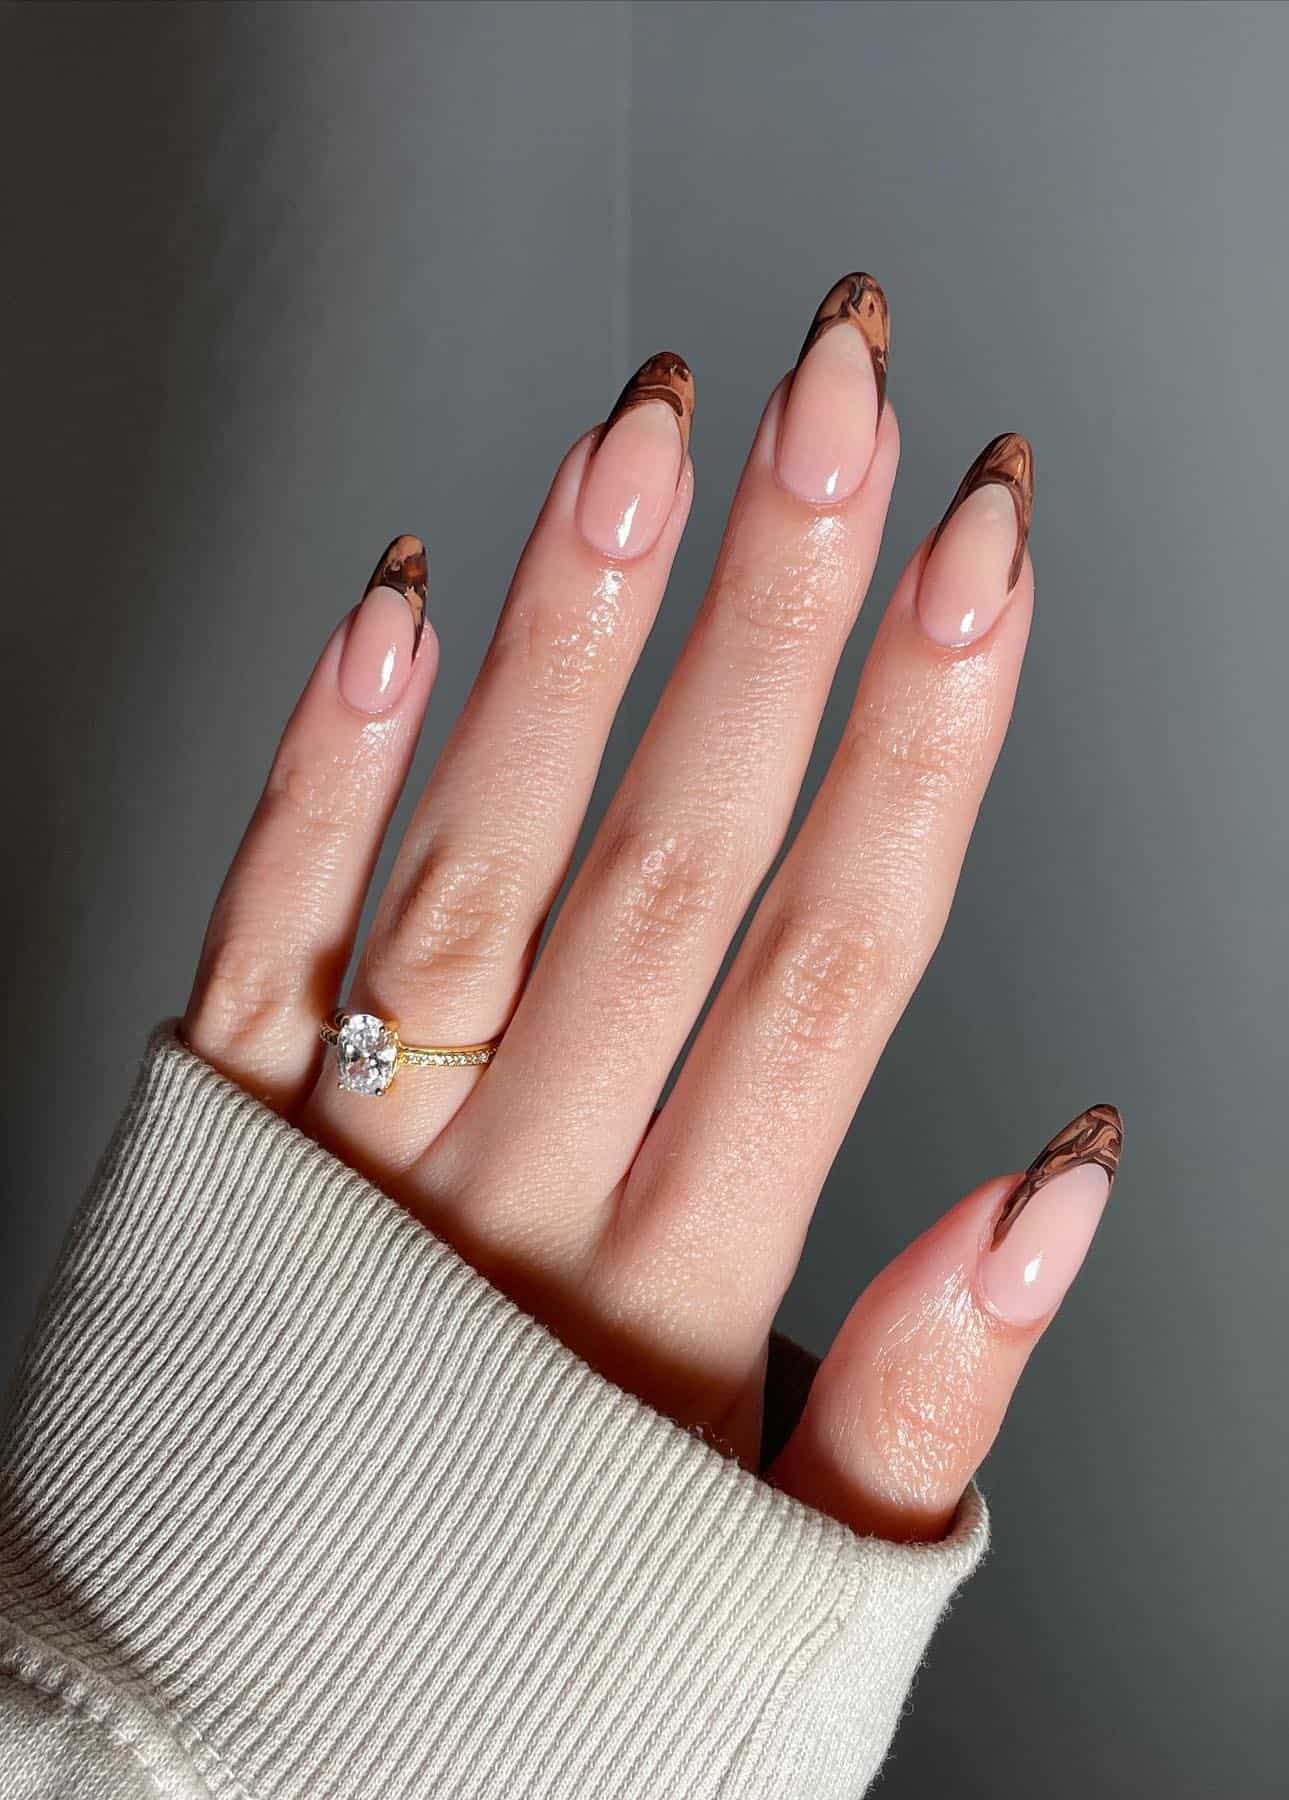 A hand with medium almond nails painted with brown marbled French tips